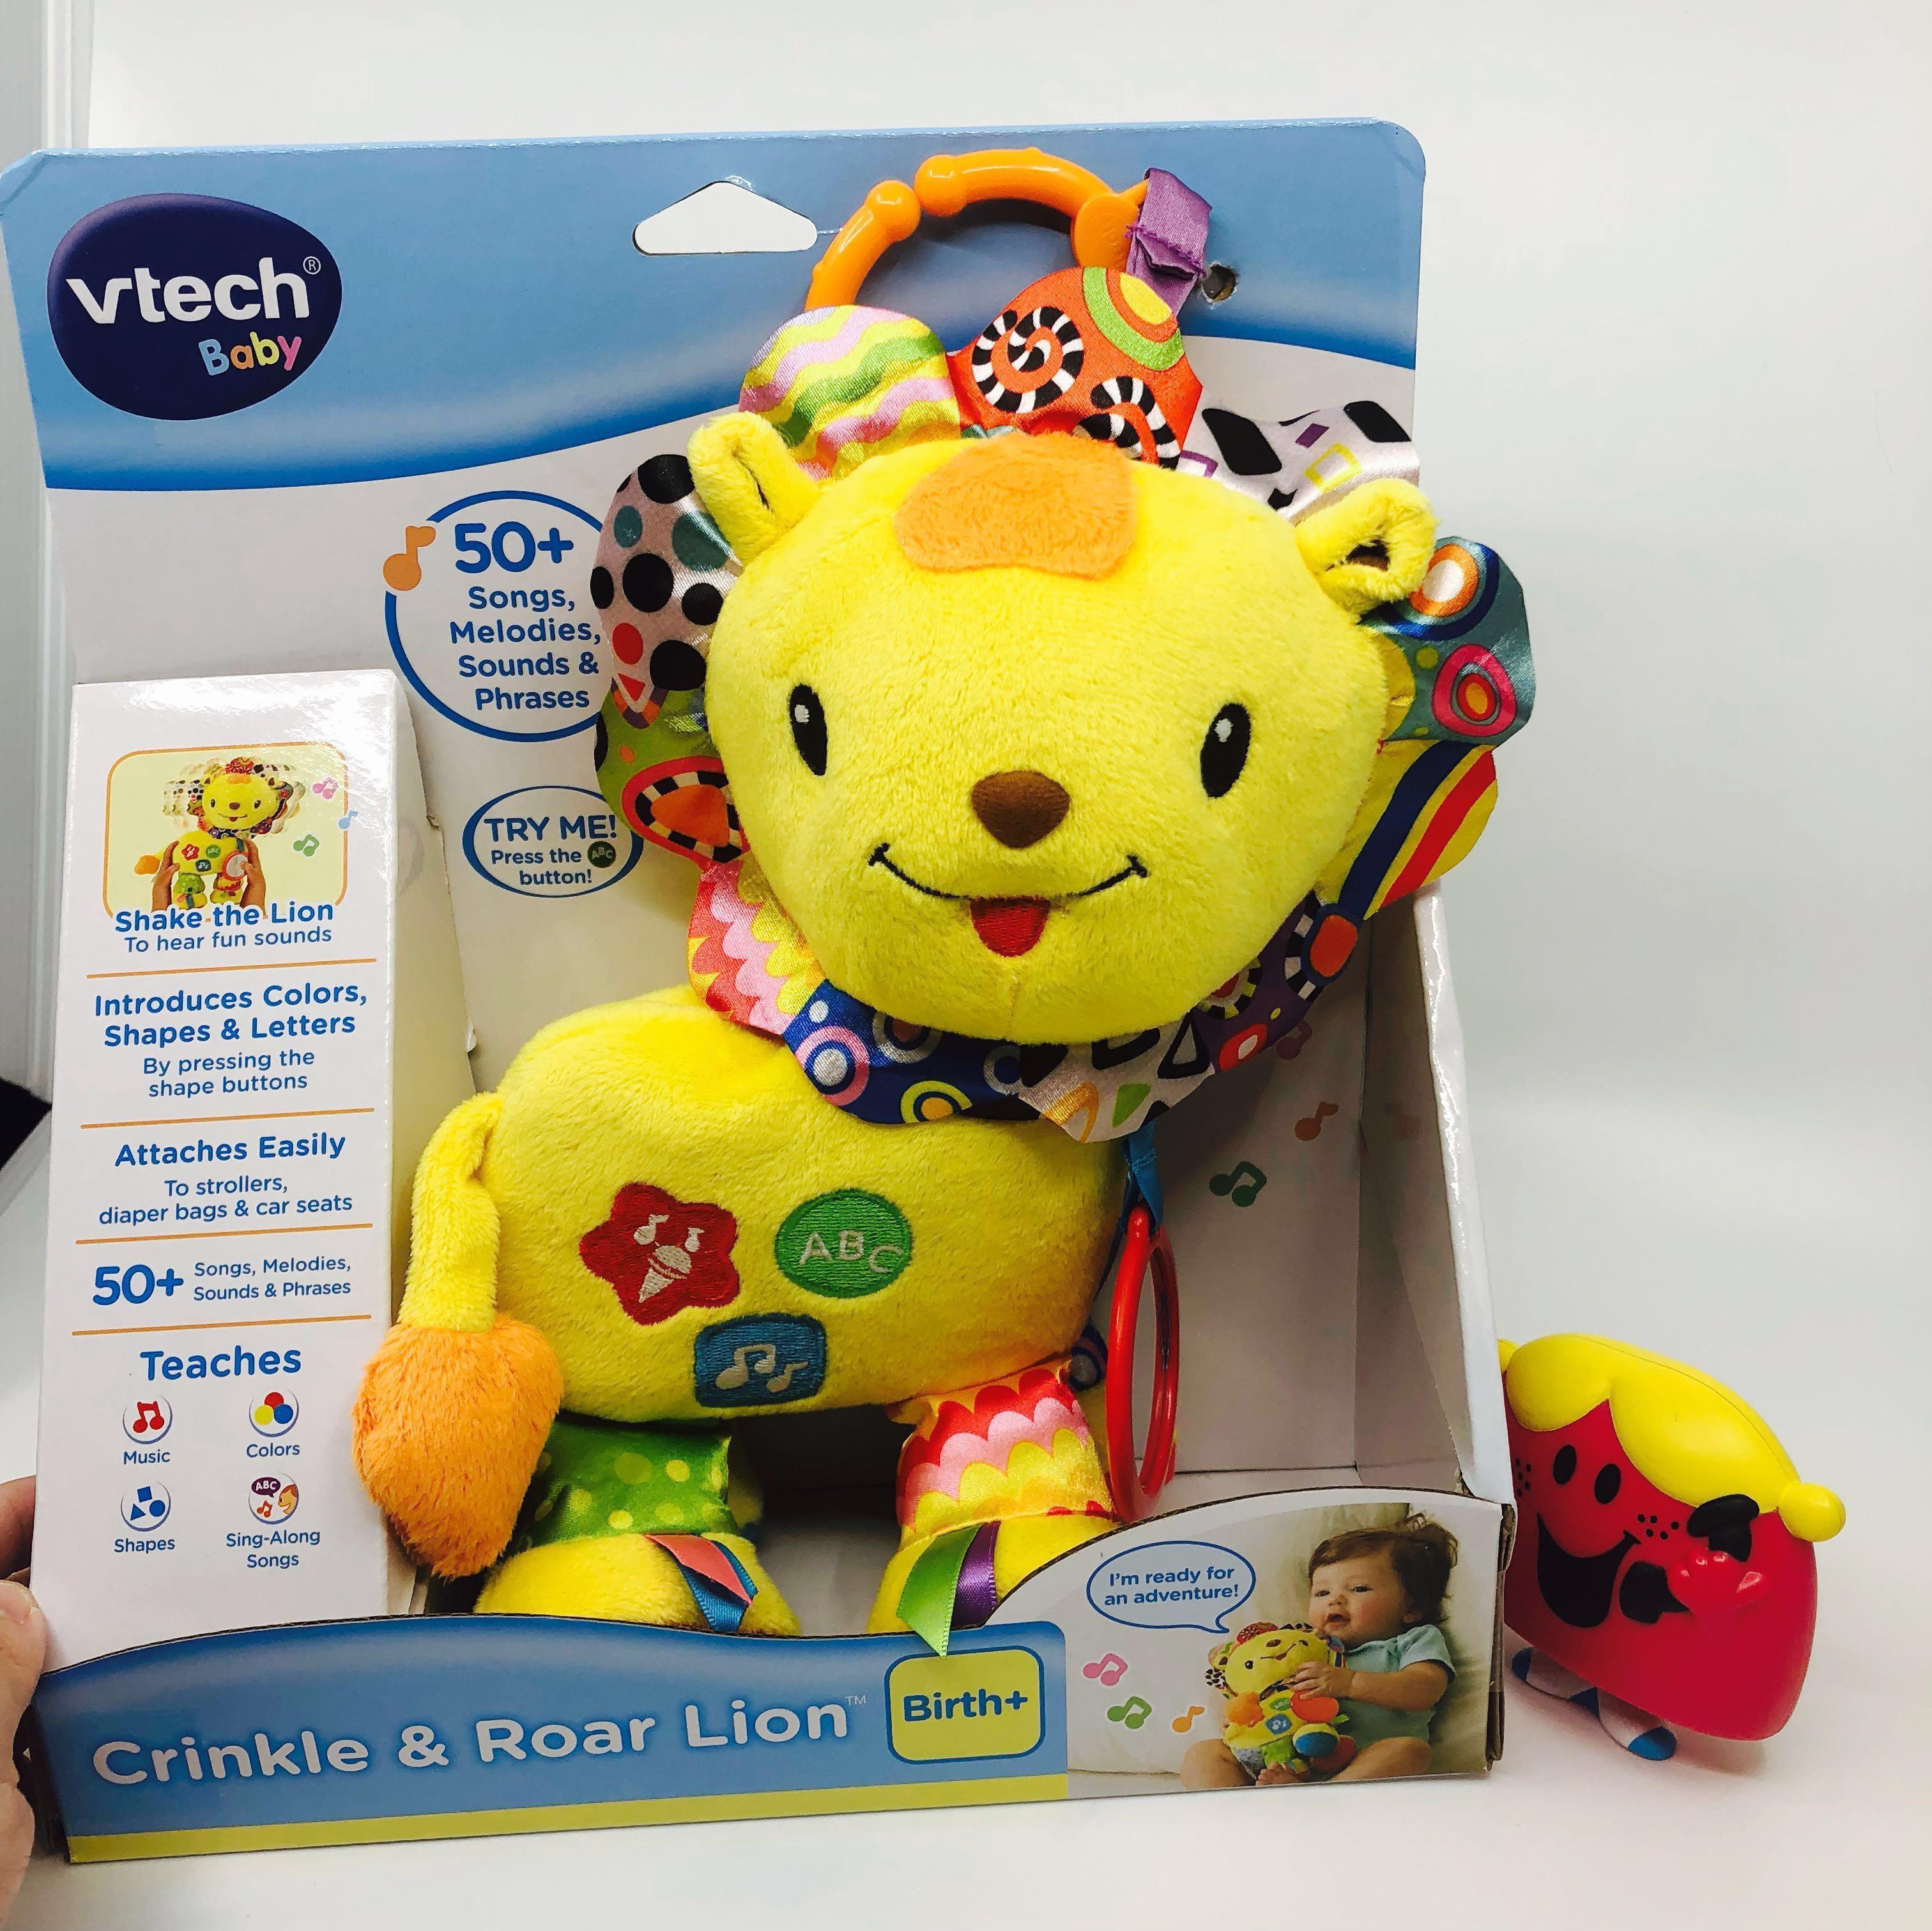 vtech baby crinkle and roar lion